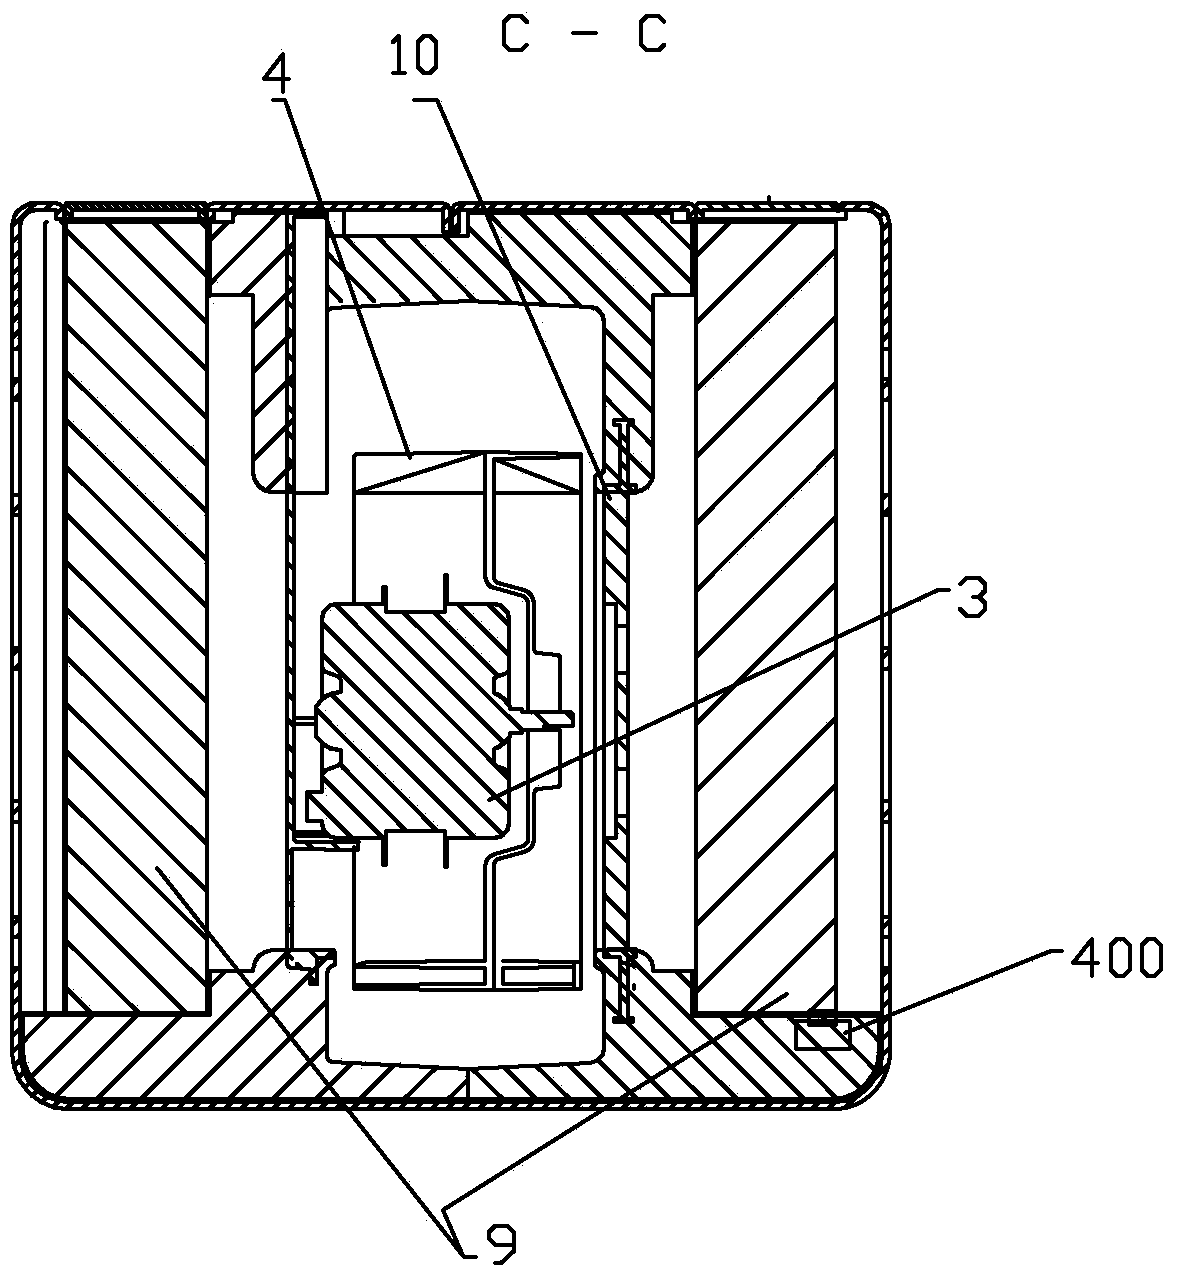 Bidirectional air intake tower type air purifier structure